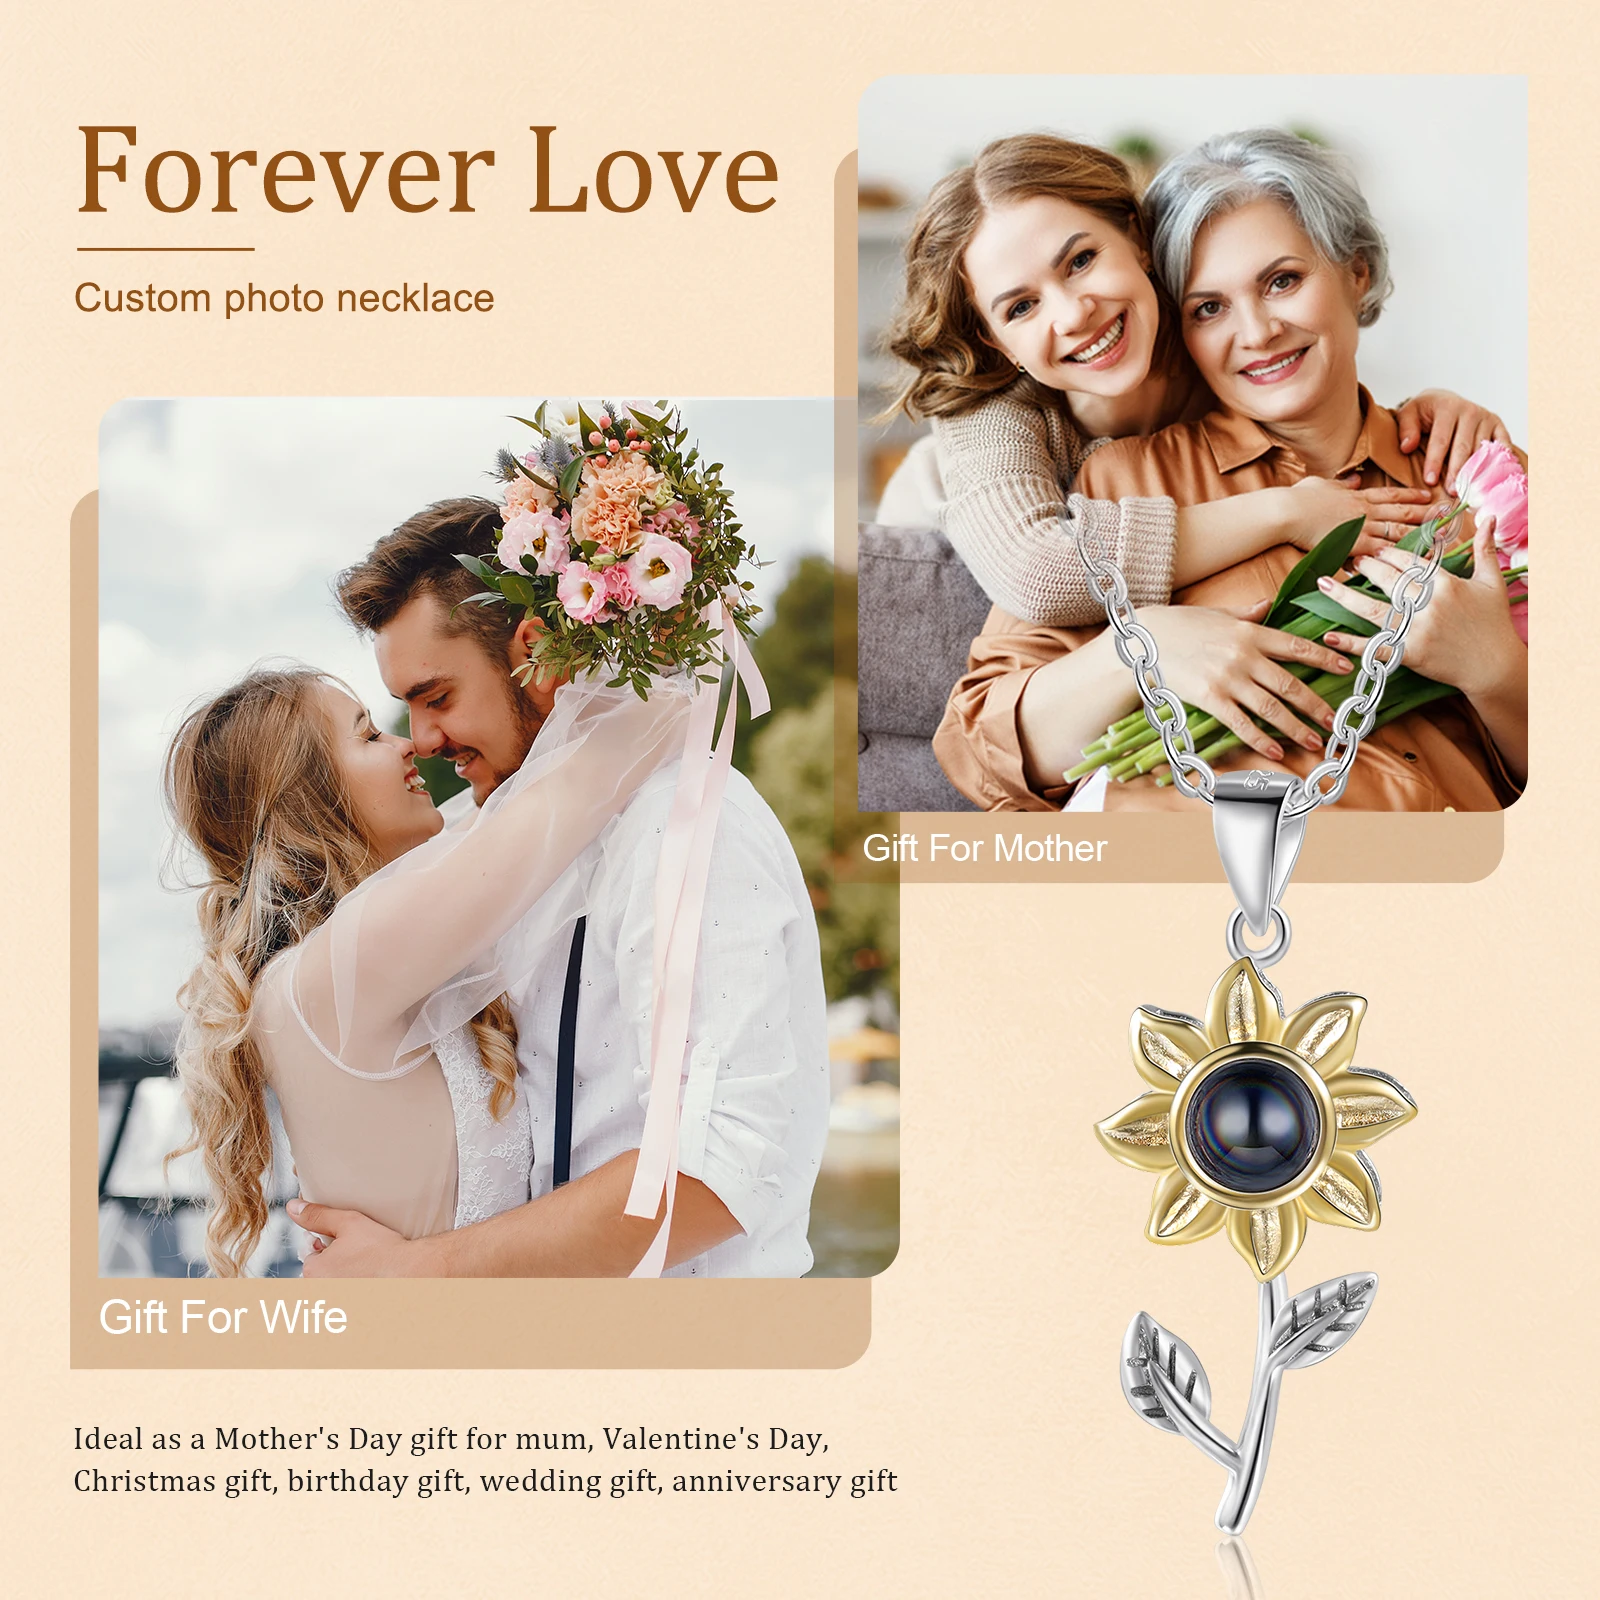 https://ae01.alicdn.com/kf/S010e5aca210f4118a029c857e859c38cr/JewelOra-Personalized-Projection-Photo-Necklace-Sunflower-Pendants-Jewelry-Gifts-for-Women-Mother-Mom-Grandma-Keepsake-Memorial.jpg